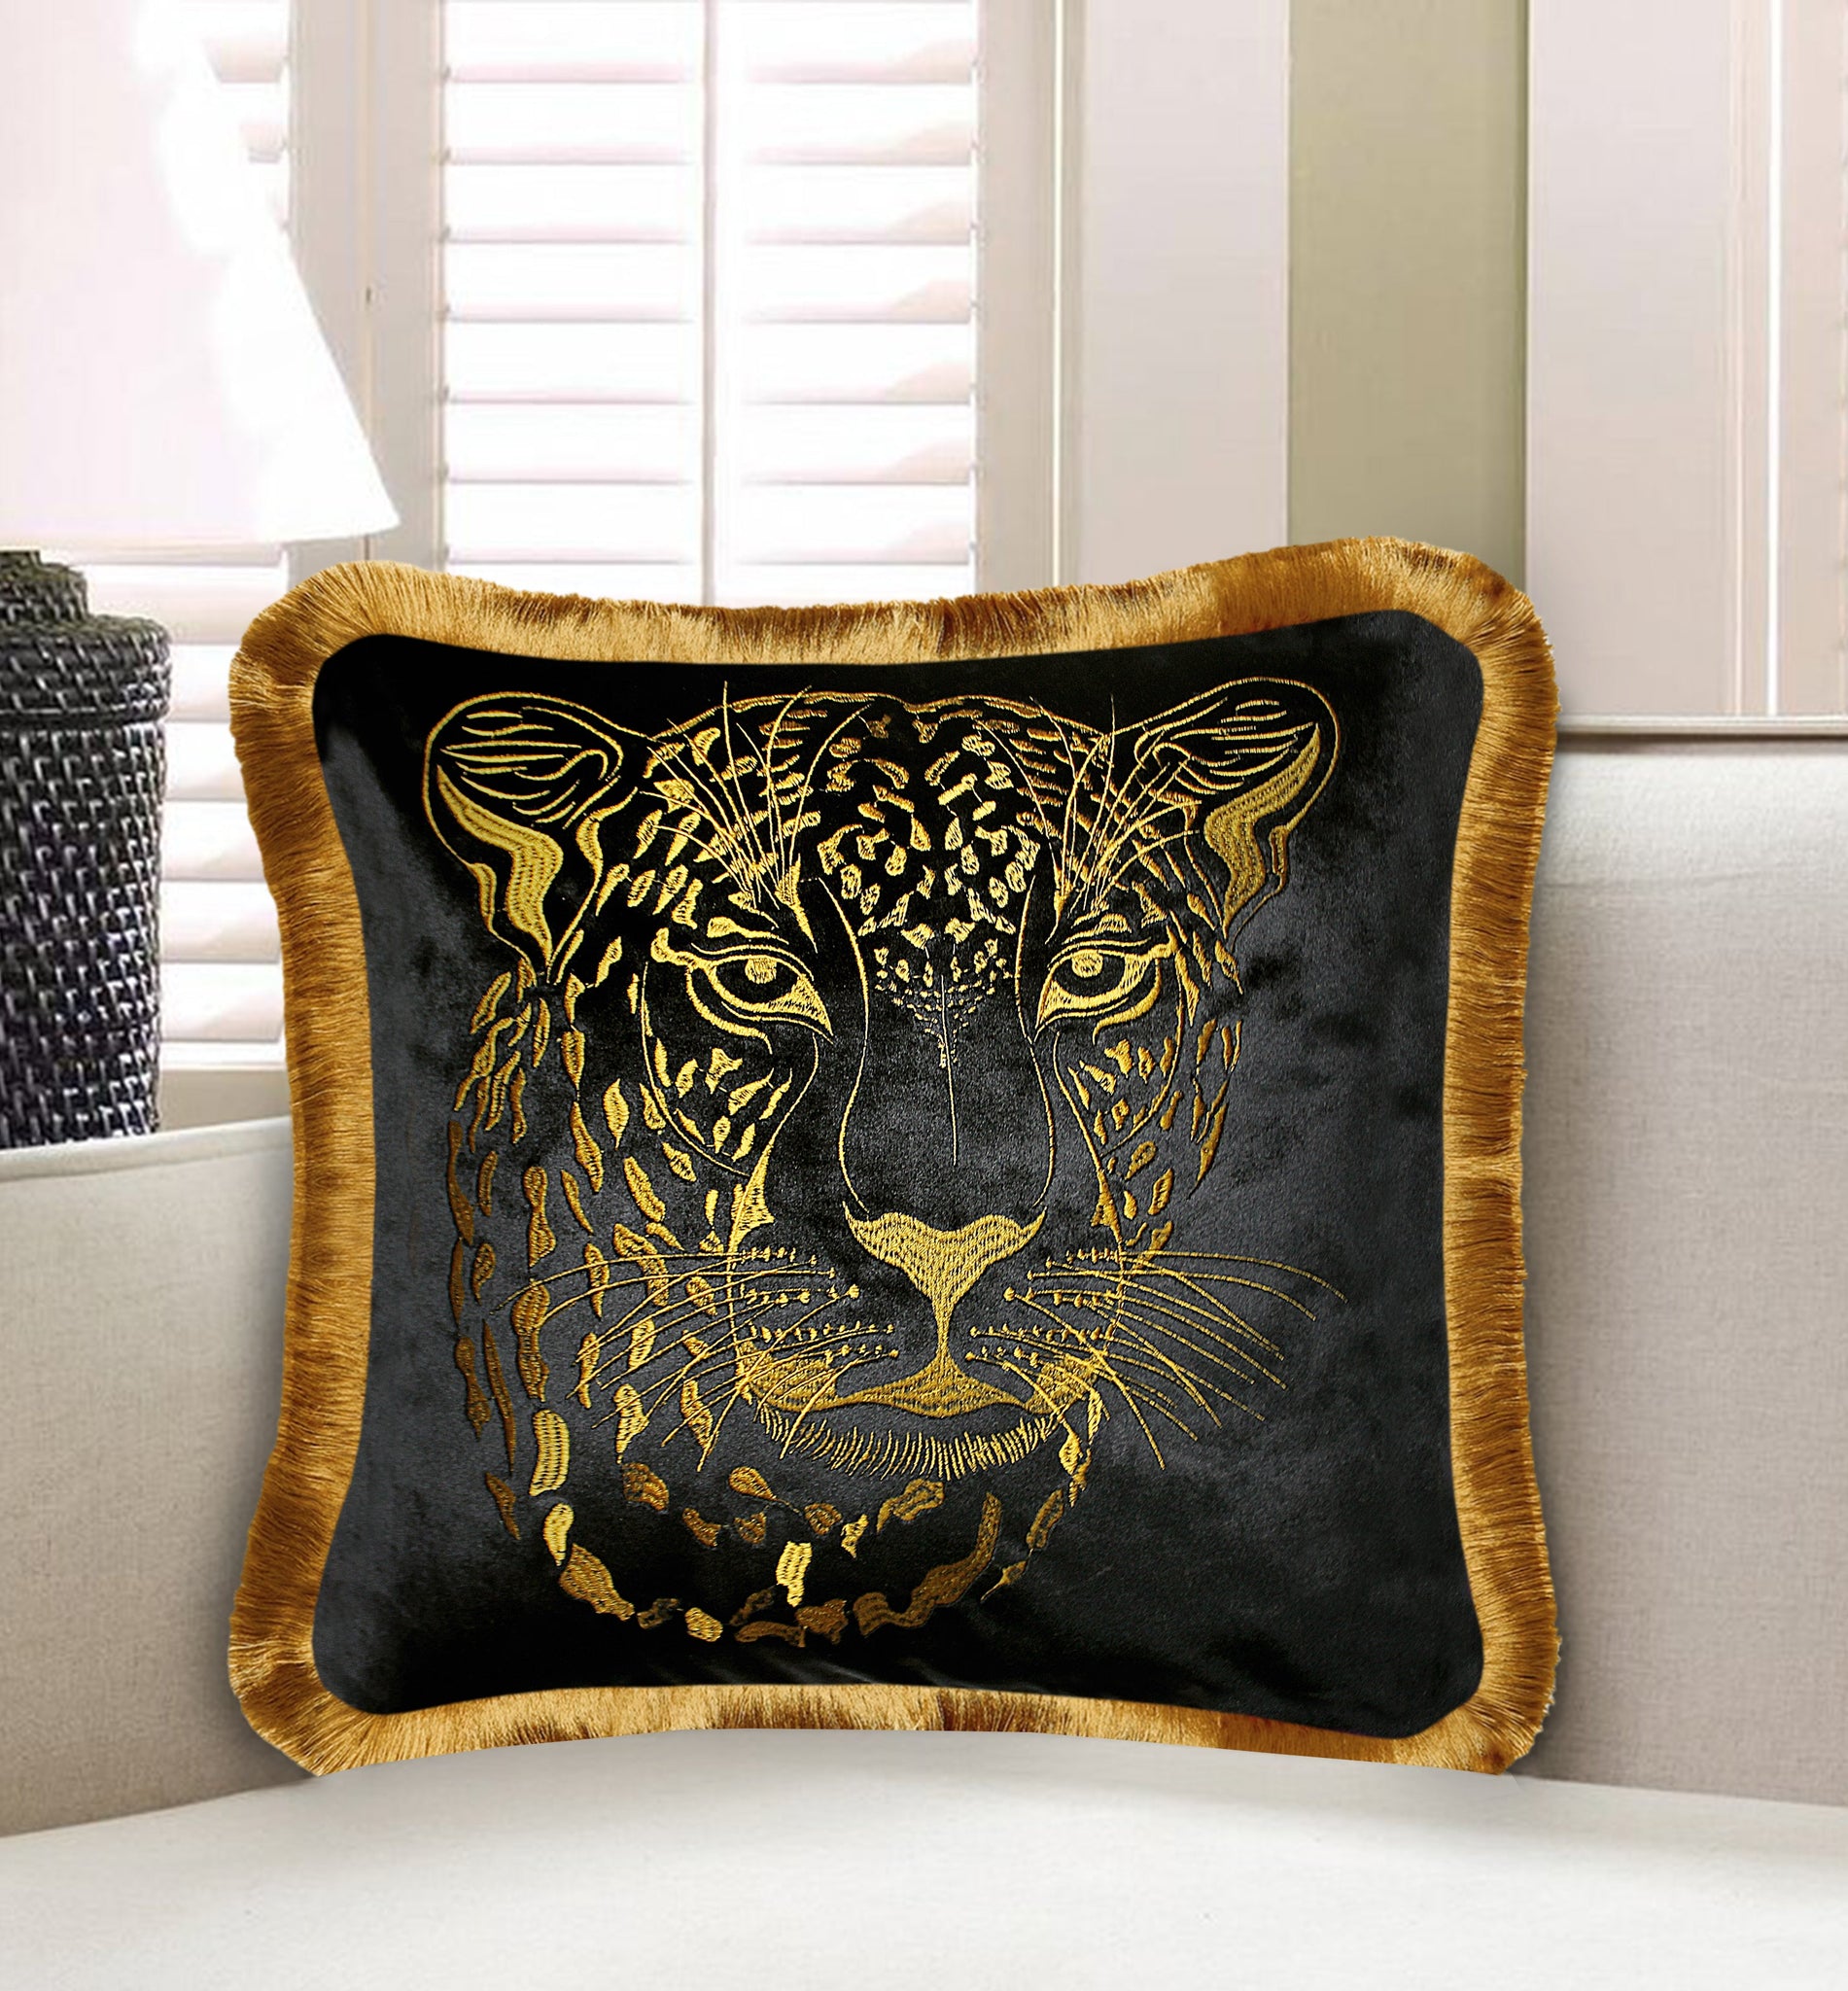  Velvet Cushion Cover Black Panther Head Decorative Pillowcase Wild Animal Embroidery Throw Pillow for Sofa Chair Bedroom Living Room Black 45x45 cm (18x18 Inches)